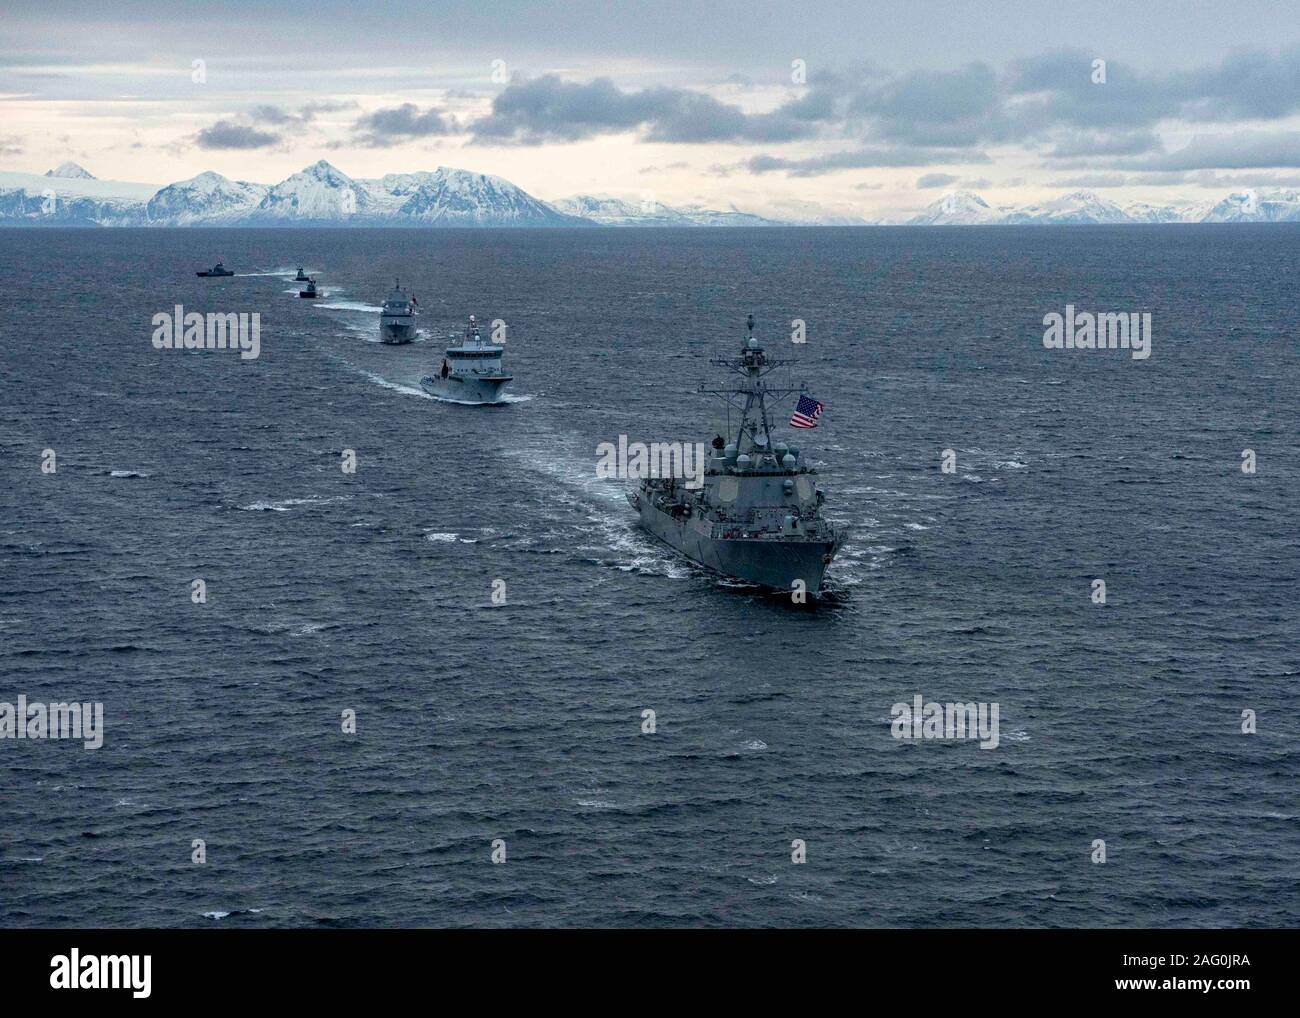 U.S. Navy Arleigh Burke-class guided-missile destroyer USS Gridley leads a formation of NATO allied ships participating in the Royal Norwegian Navy led exercise FLOTEX 19 November 24, 2019 in the Norwegian Sea. Stock Photo